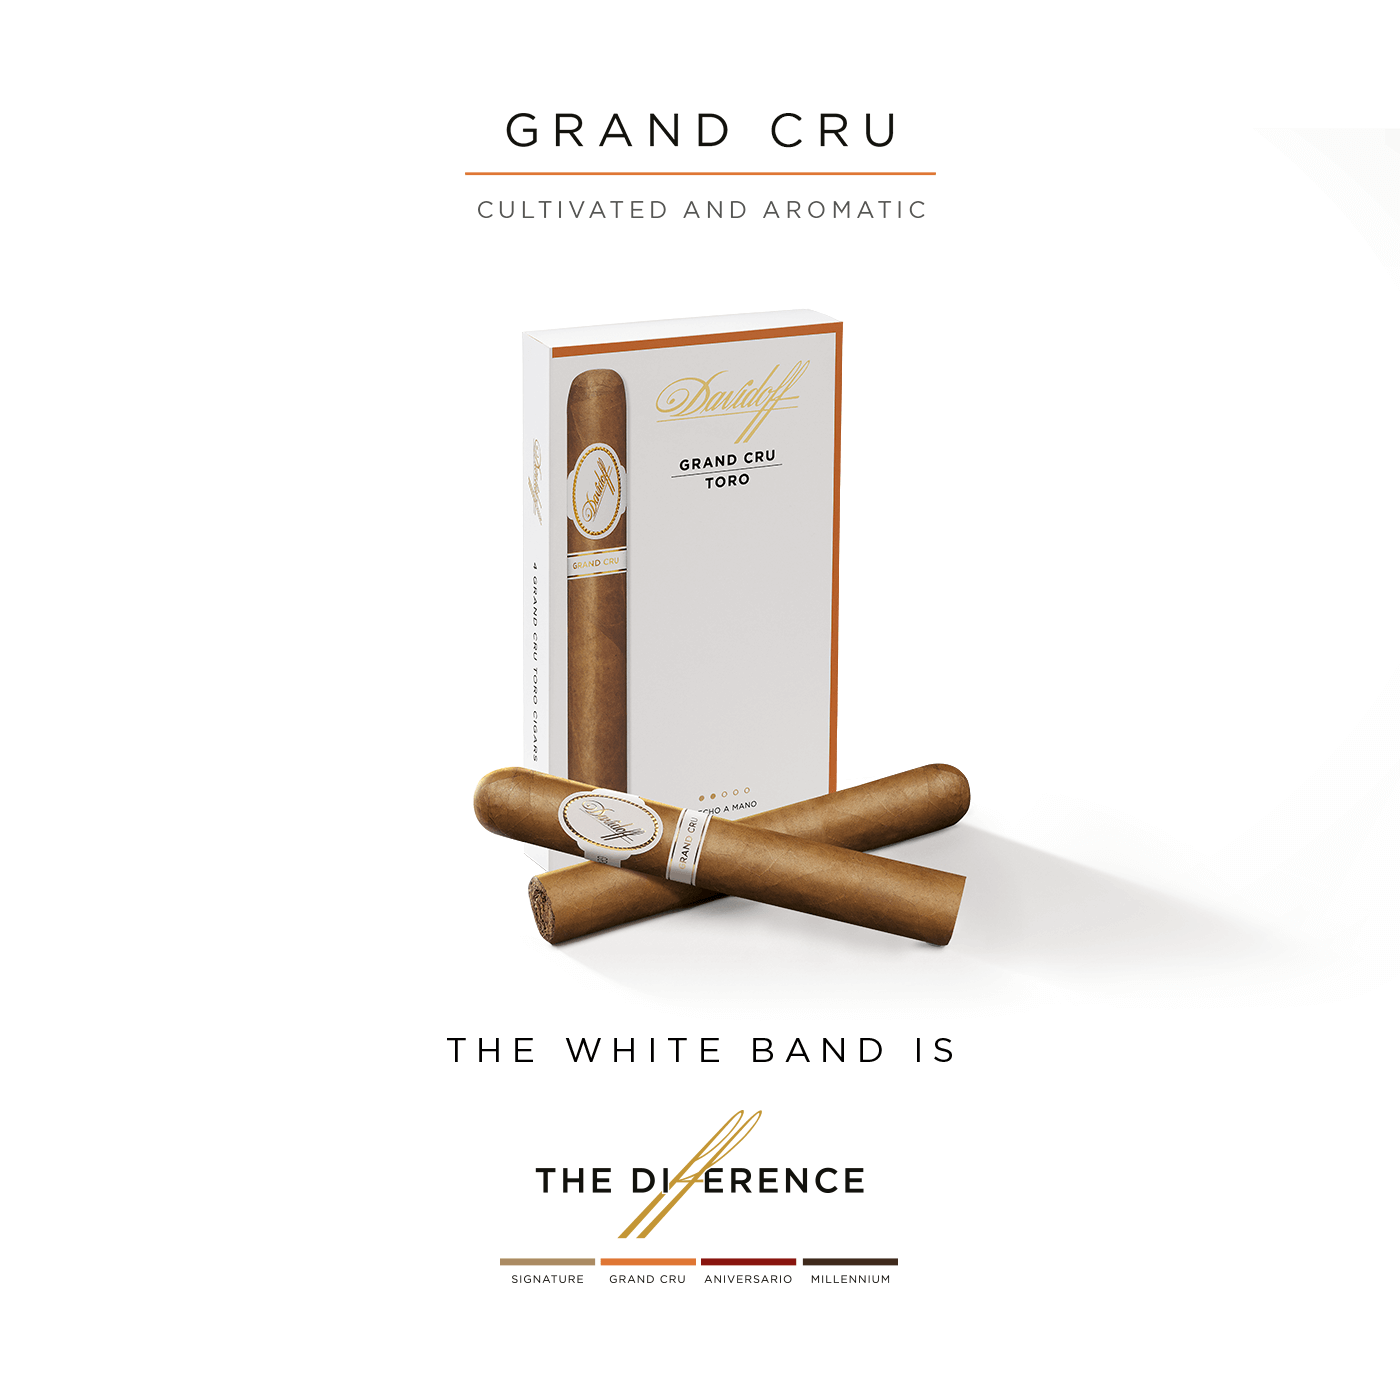 Two Davidoff Grand Cru Toro cigars placed crosswise in front of their box.